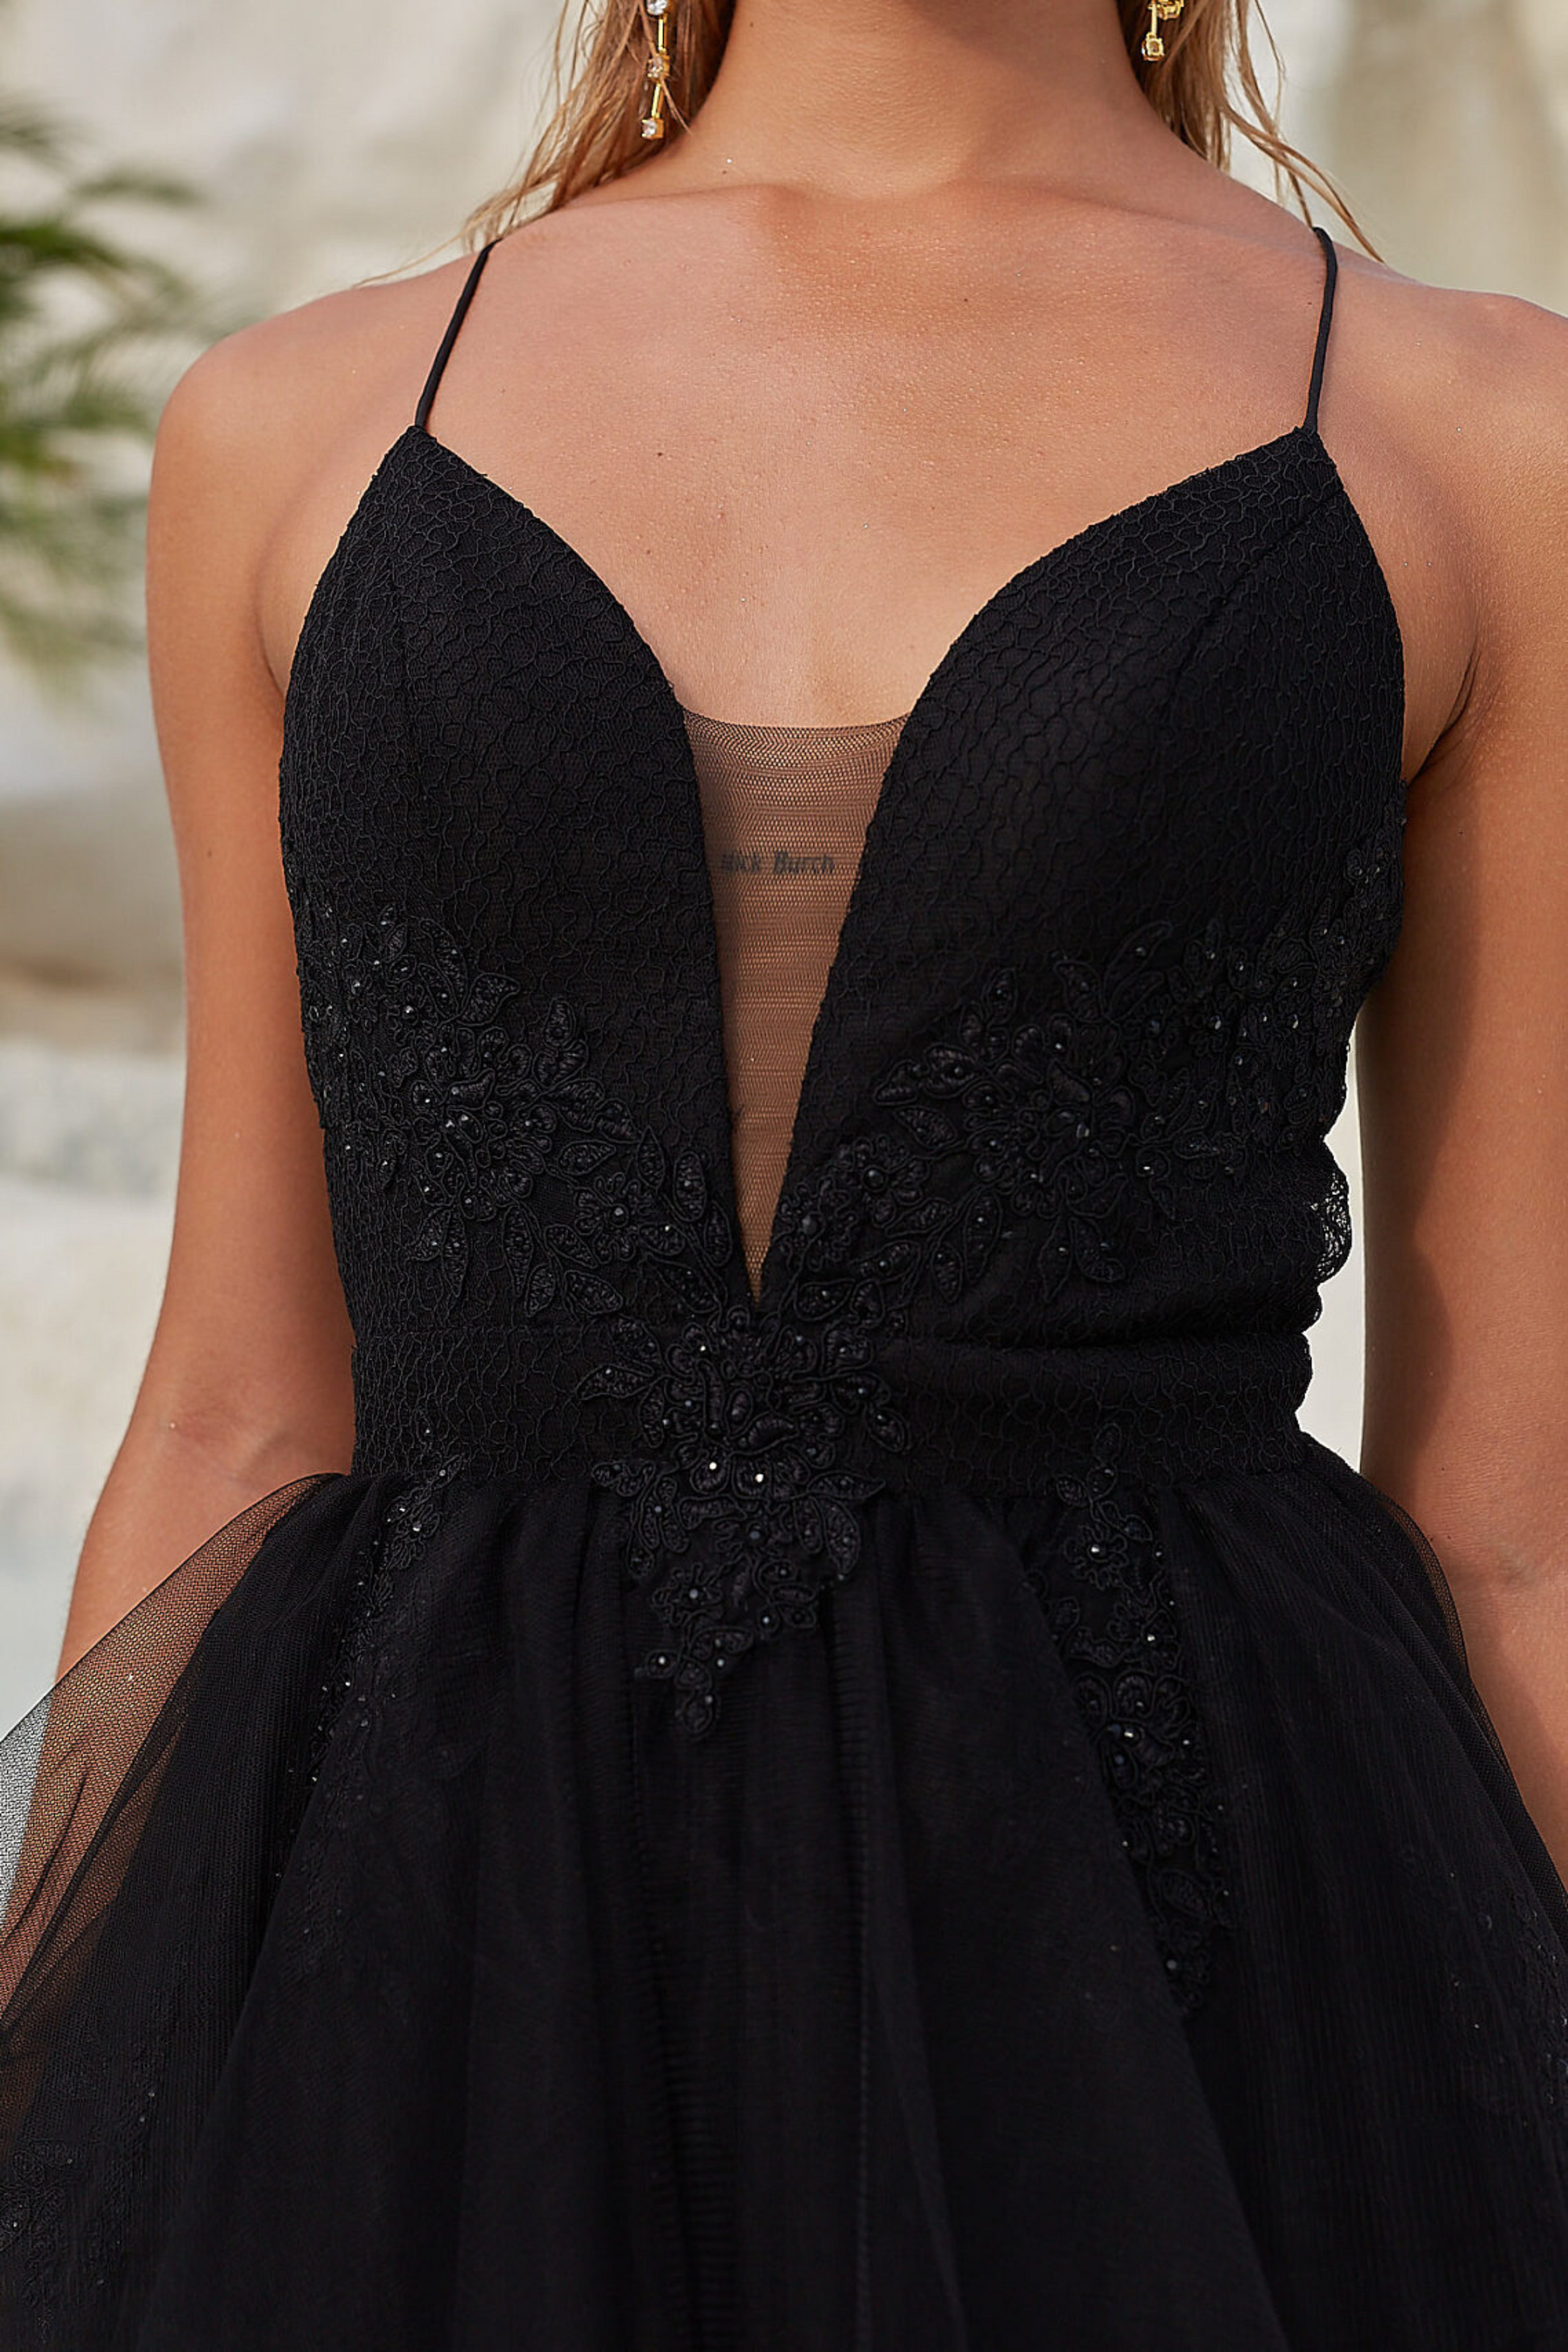 Tania Olsen a-line formal dress in black beaded lace and tulle